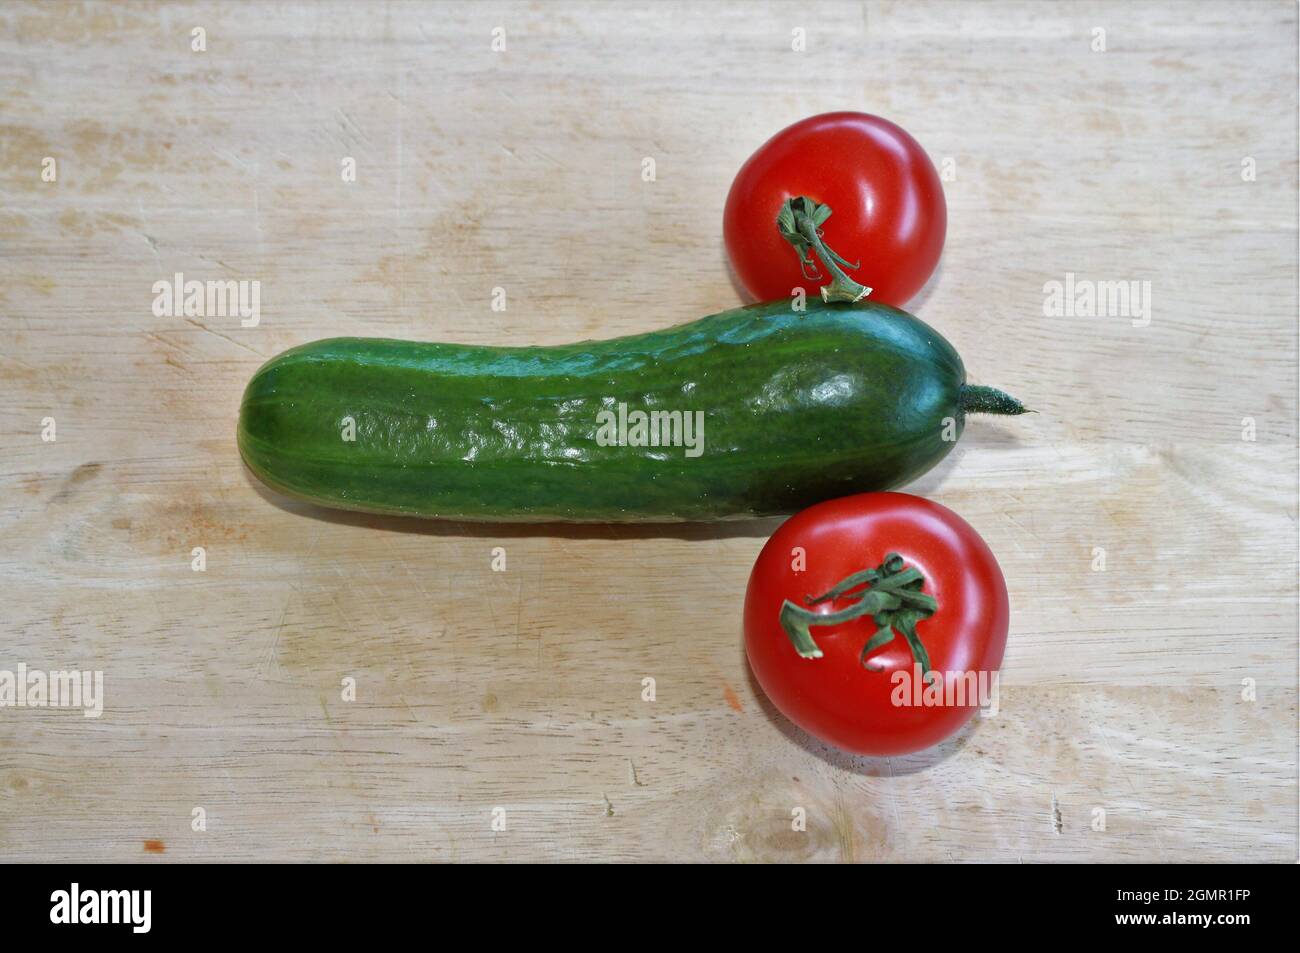 Vegetables in the form of cucumbers and tomatoes  symbolize Stock Photo